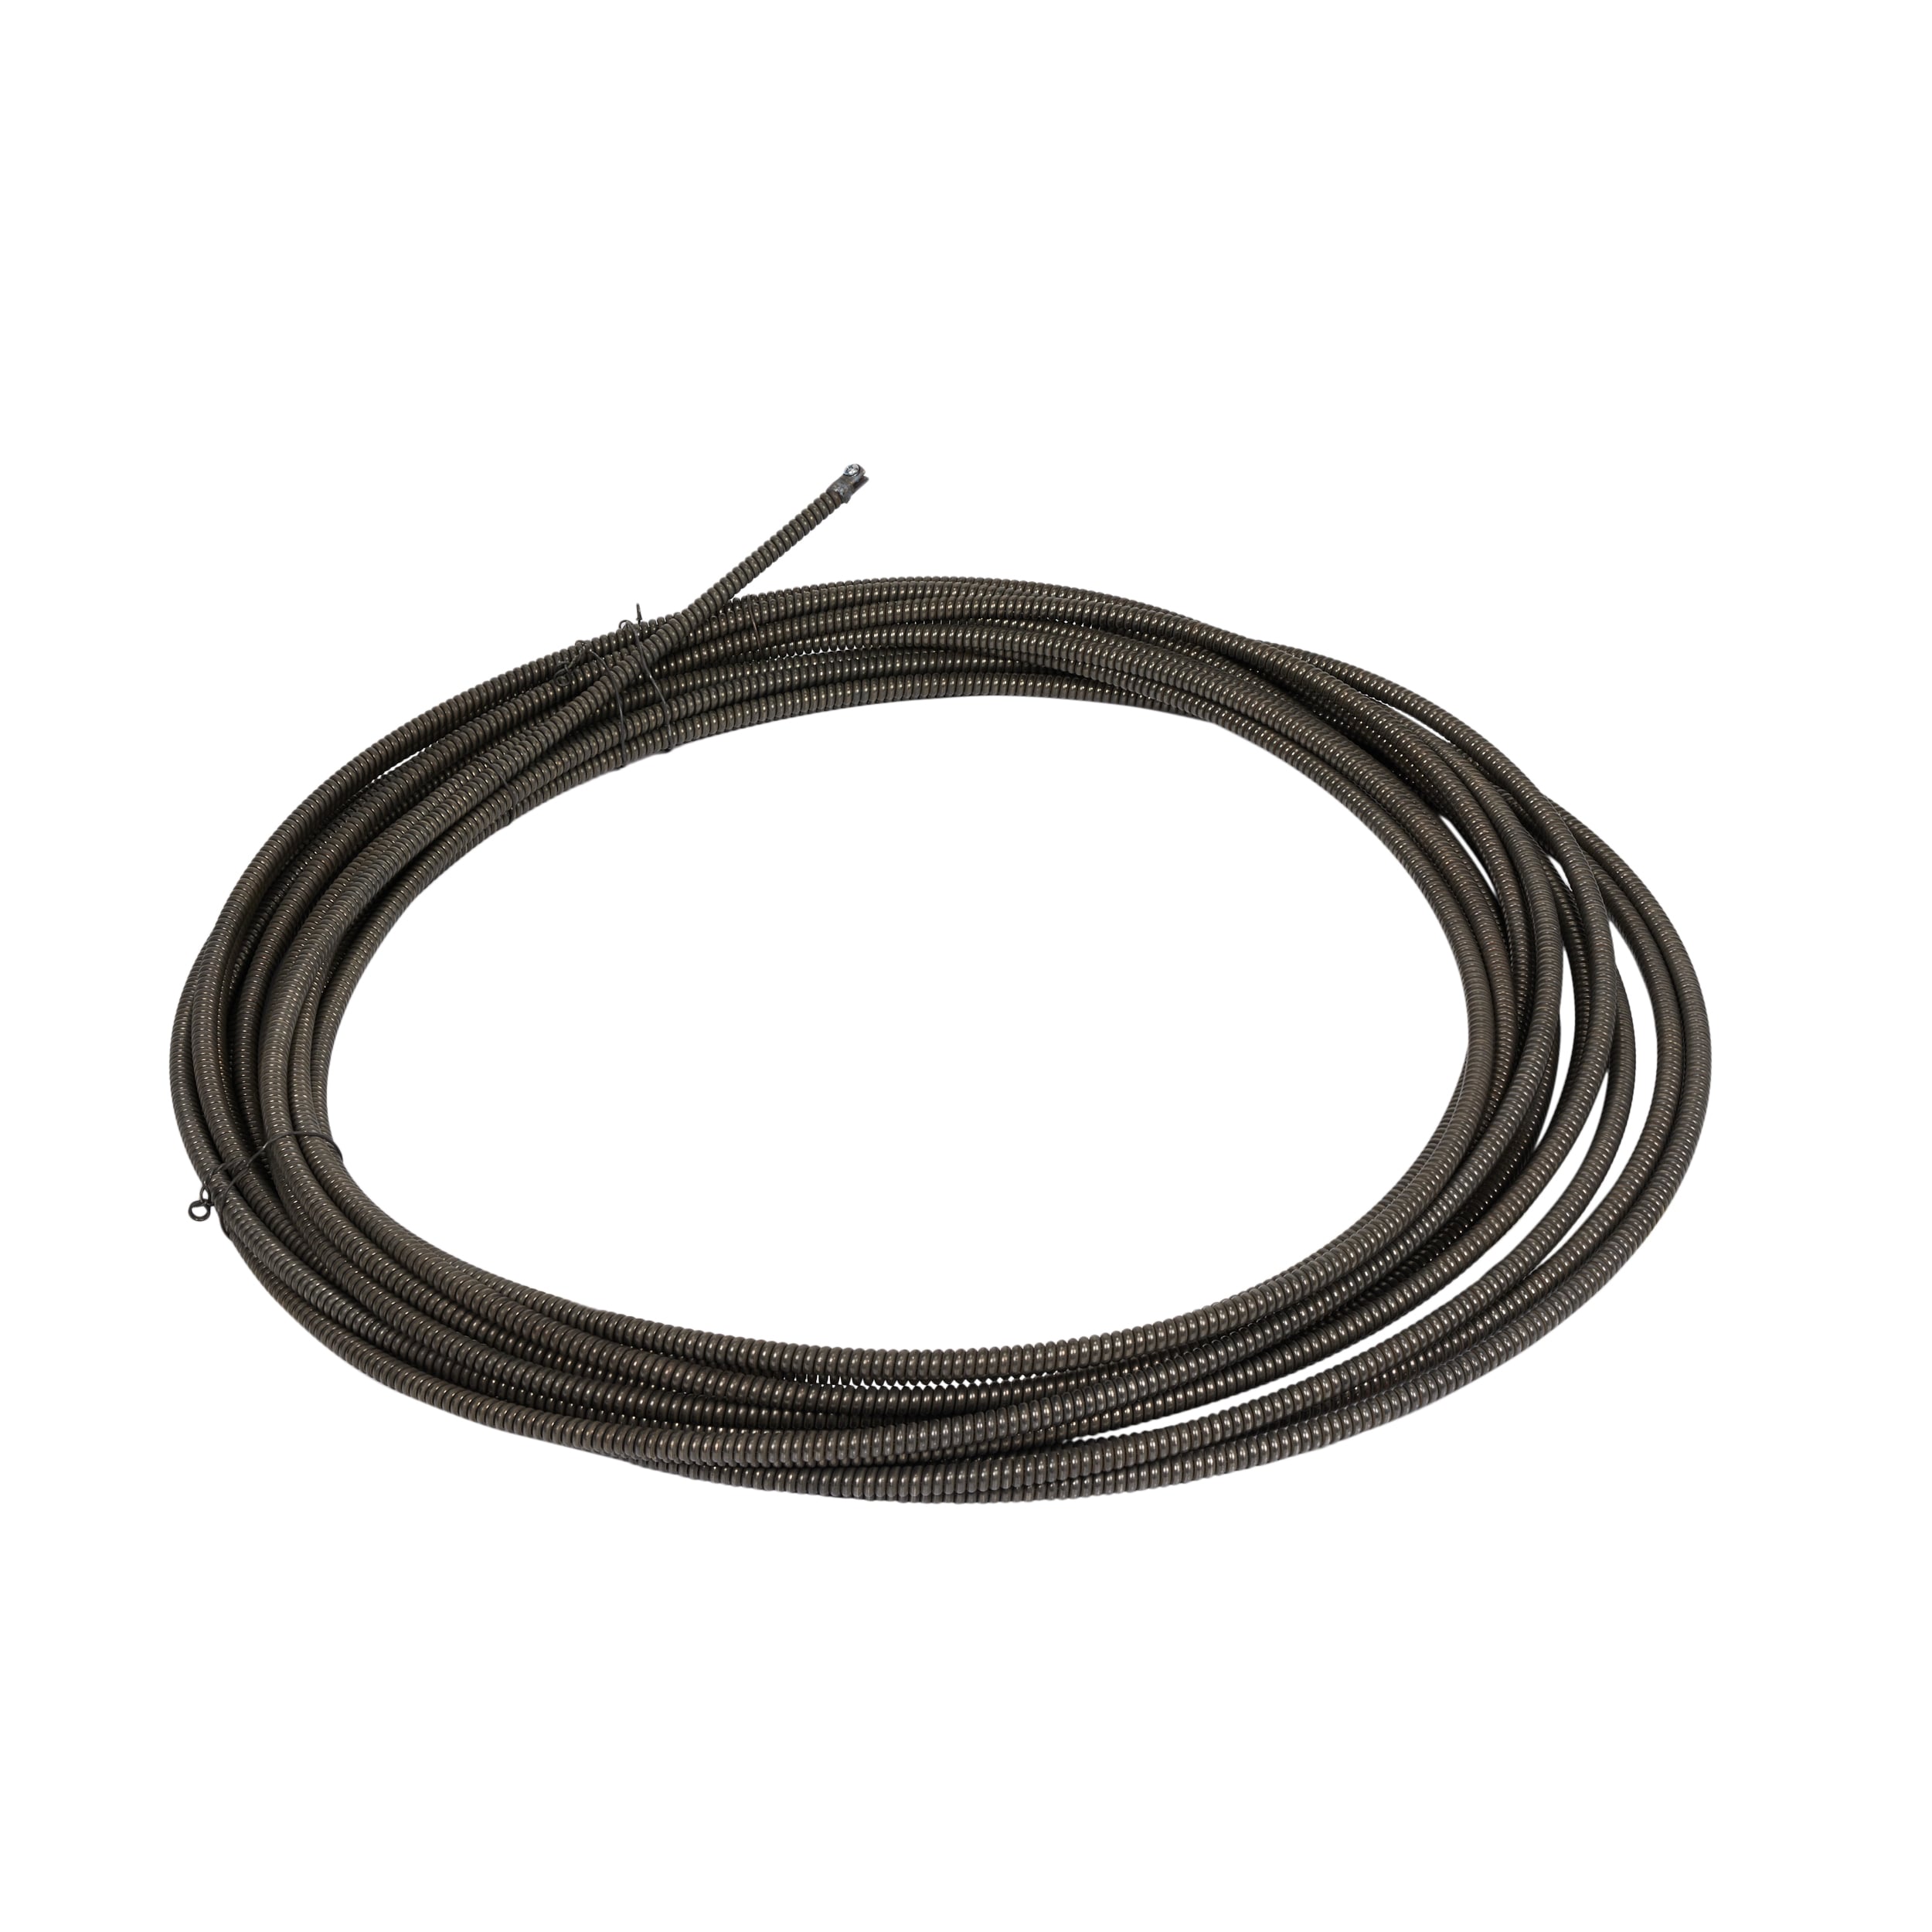 Flexicore General 5/8 in. x 100 ft. Cable 100EM4